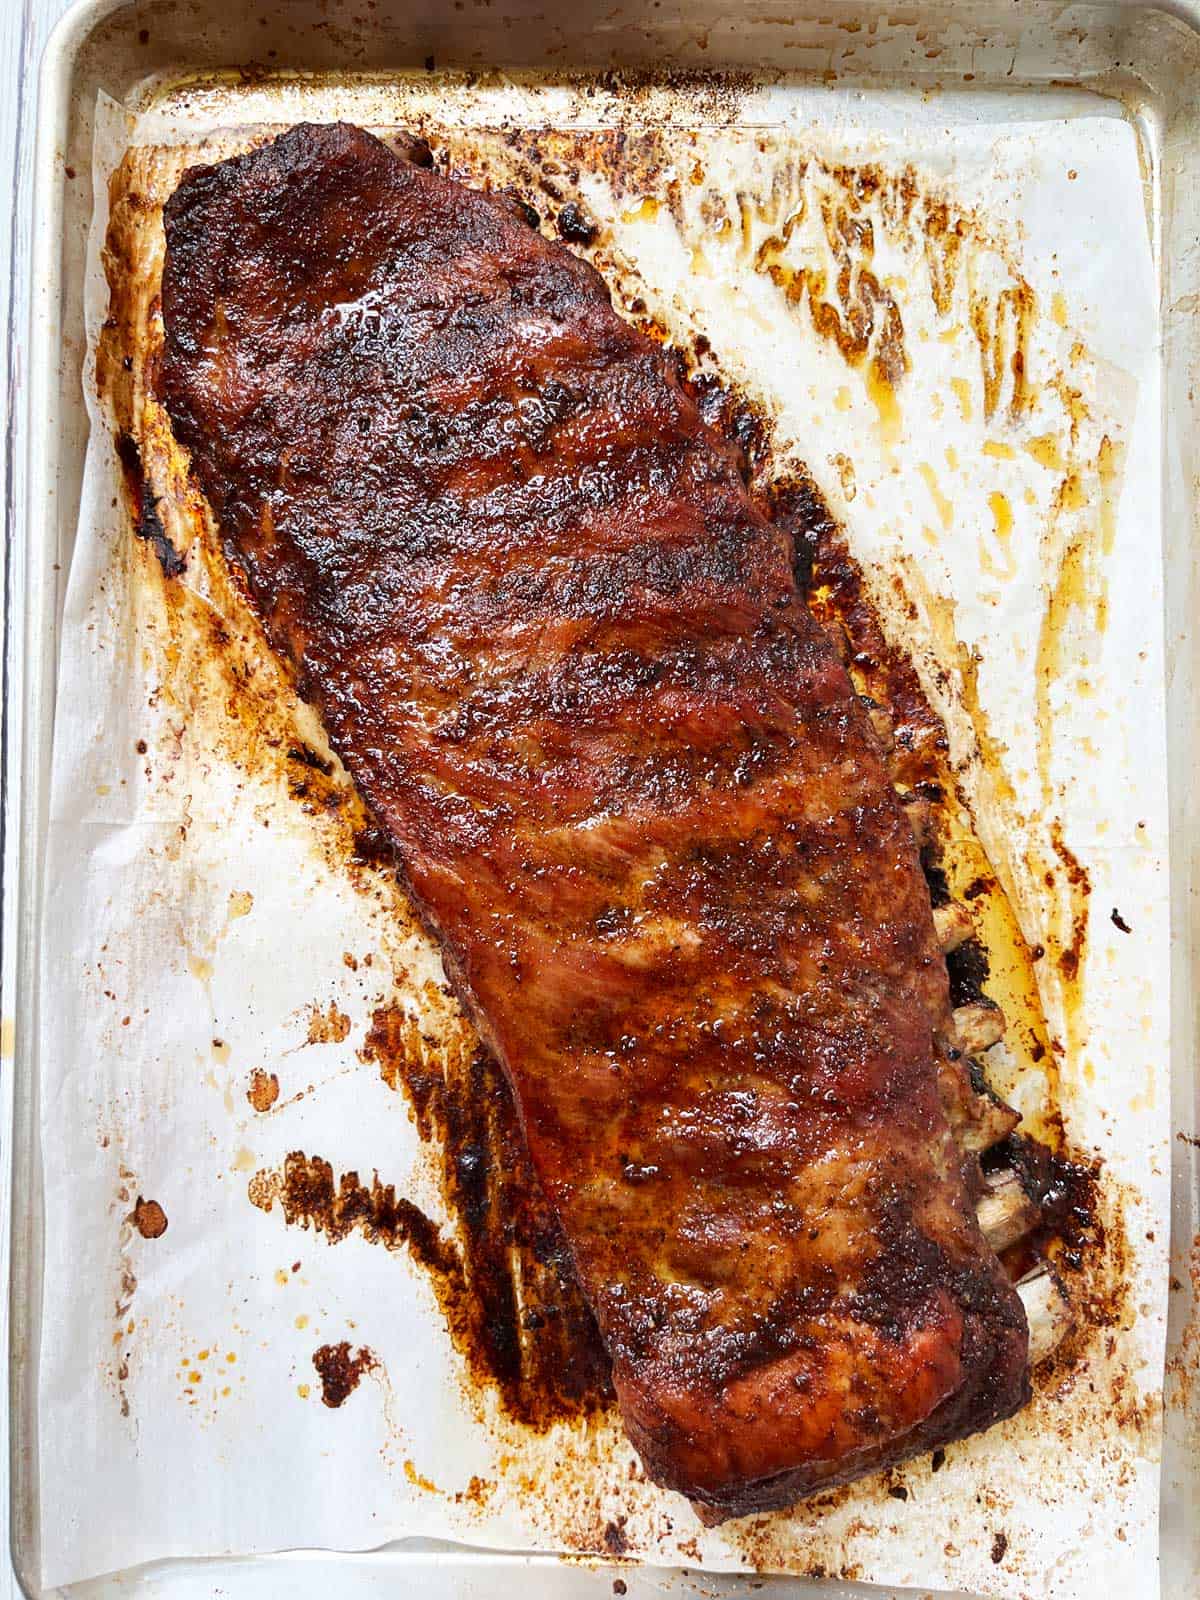 A slab of spare ribs on a baking sheet.